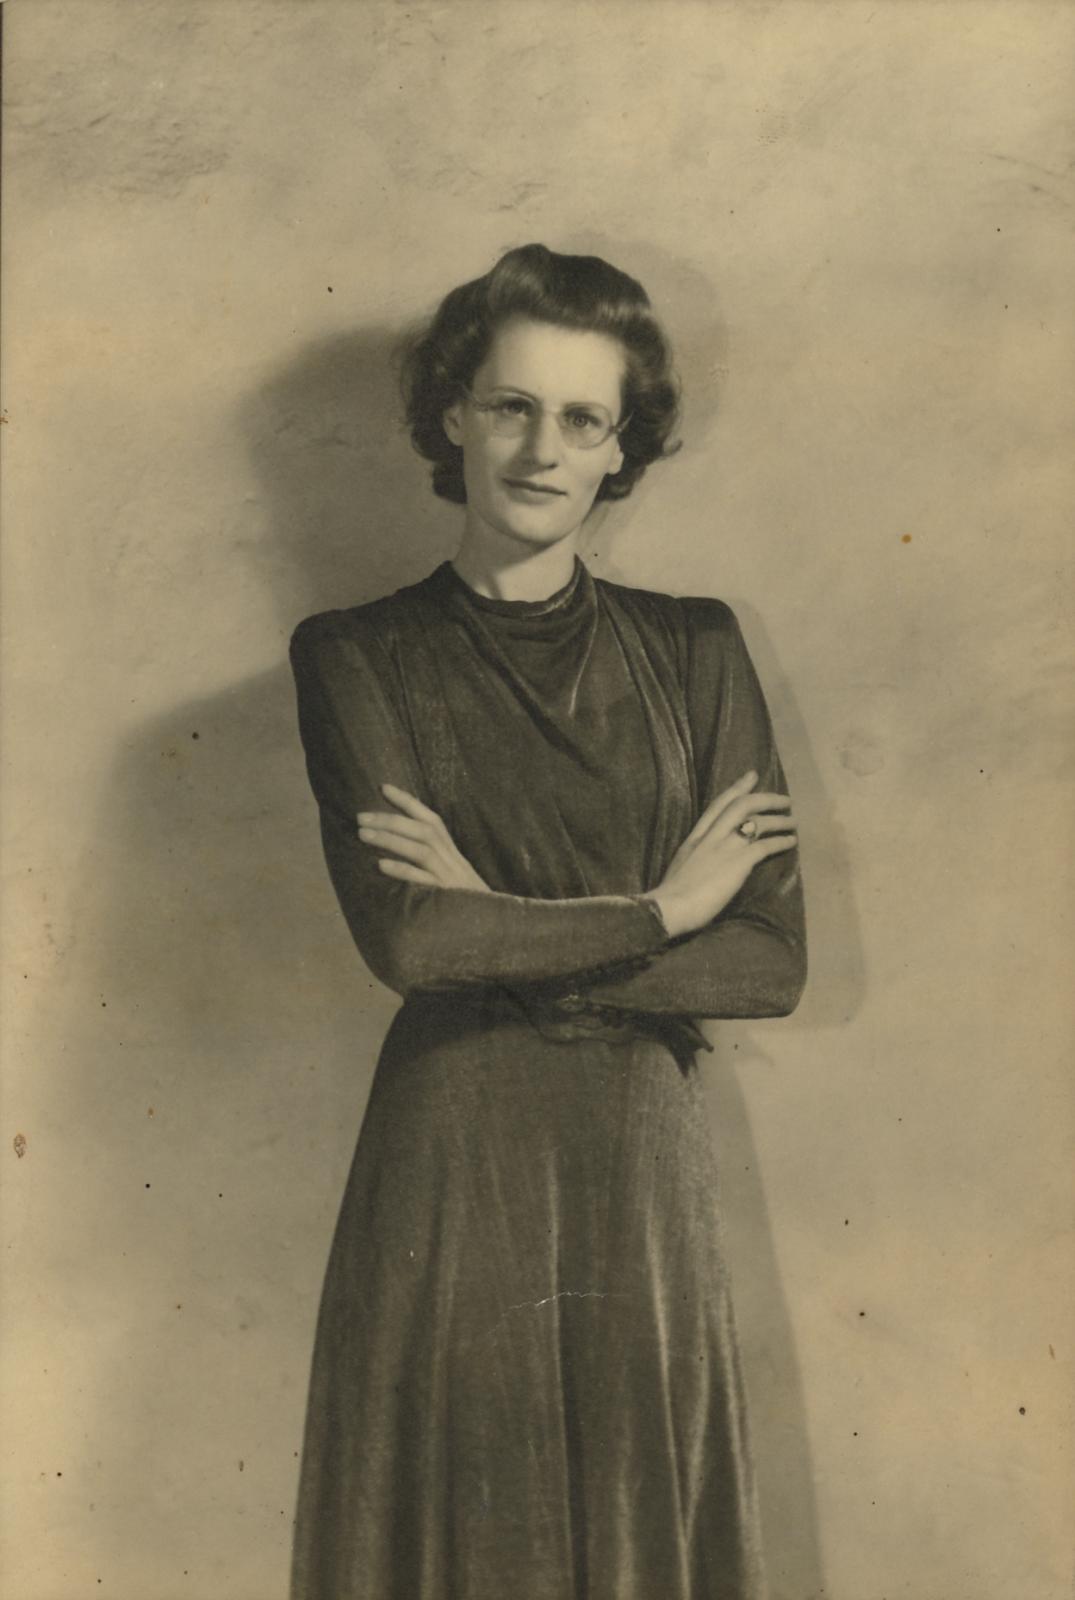 Diana Athill in 1929 LMH alumna